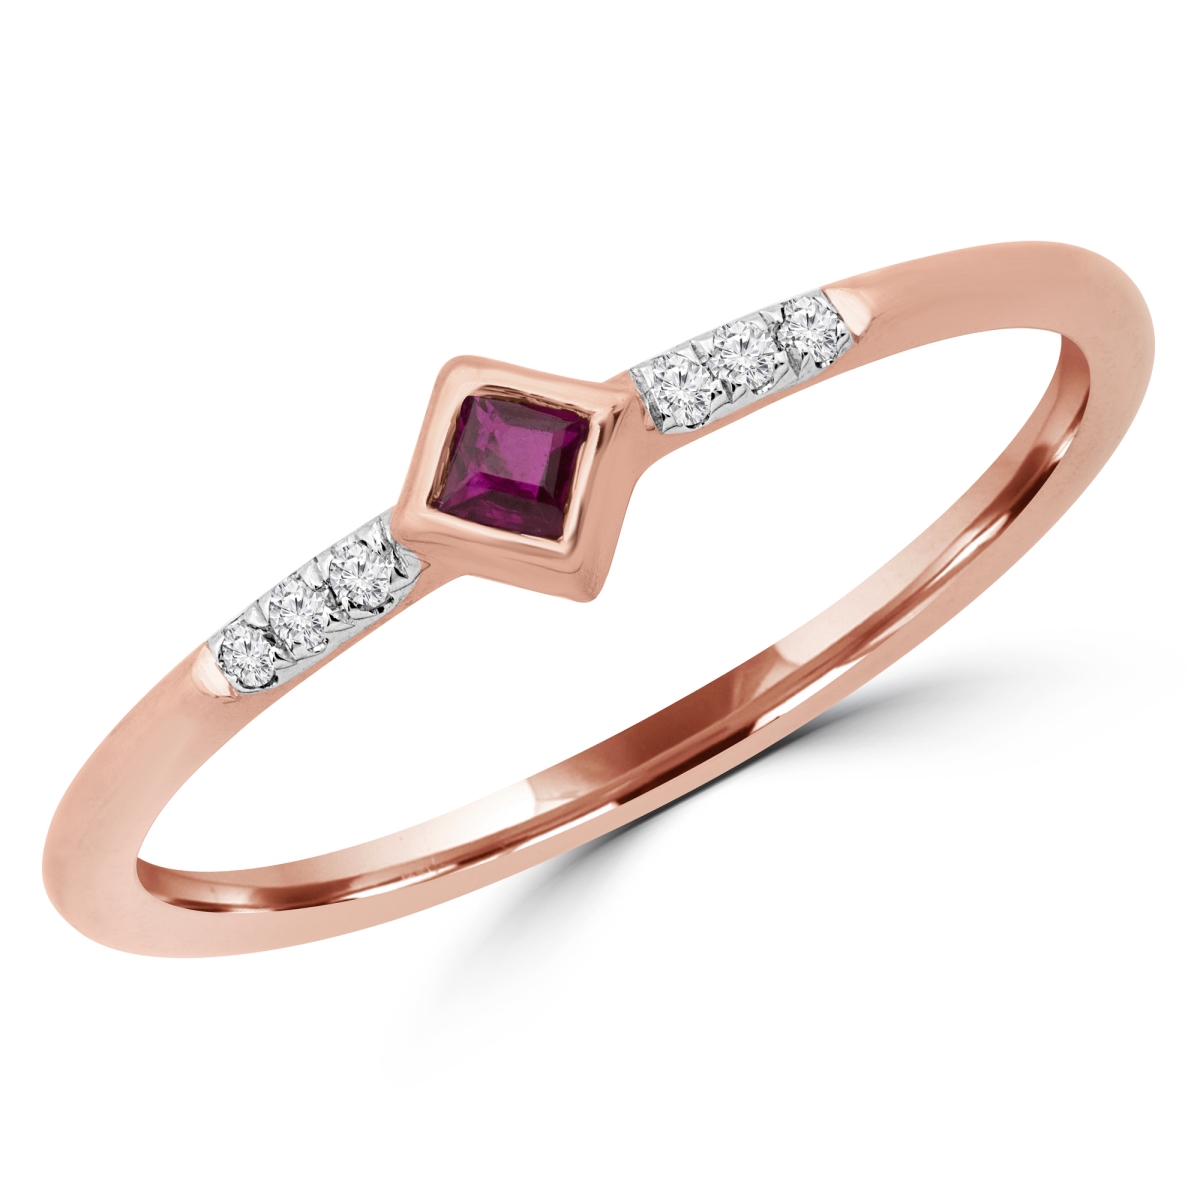 Picture of Majesty Diamonds MDR190078-8.75 0.1 CTW Round Red Ruby Bezel Set Cocktail Ring in 14K Rose Gold - Size 8.75